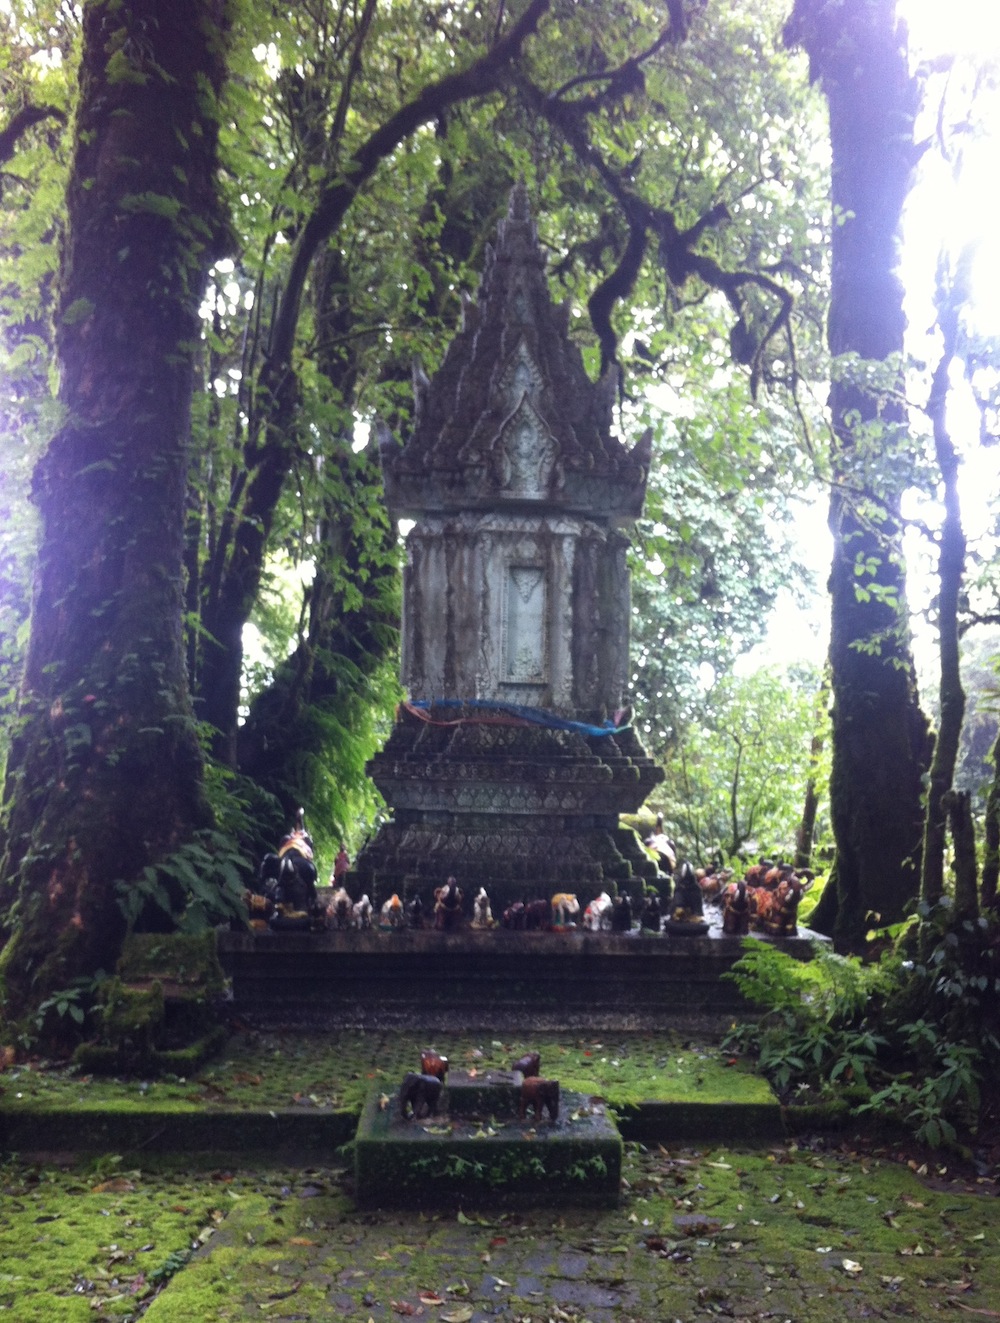 Shrine in the forest in Doi Inthanon national park in Thailand